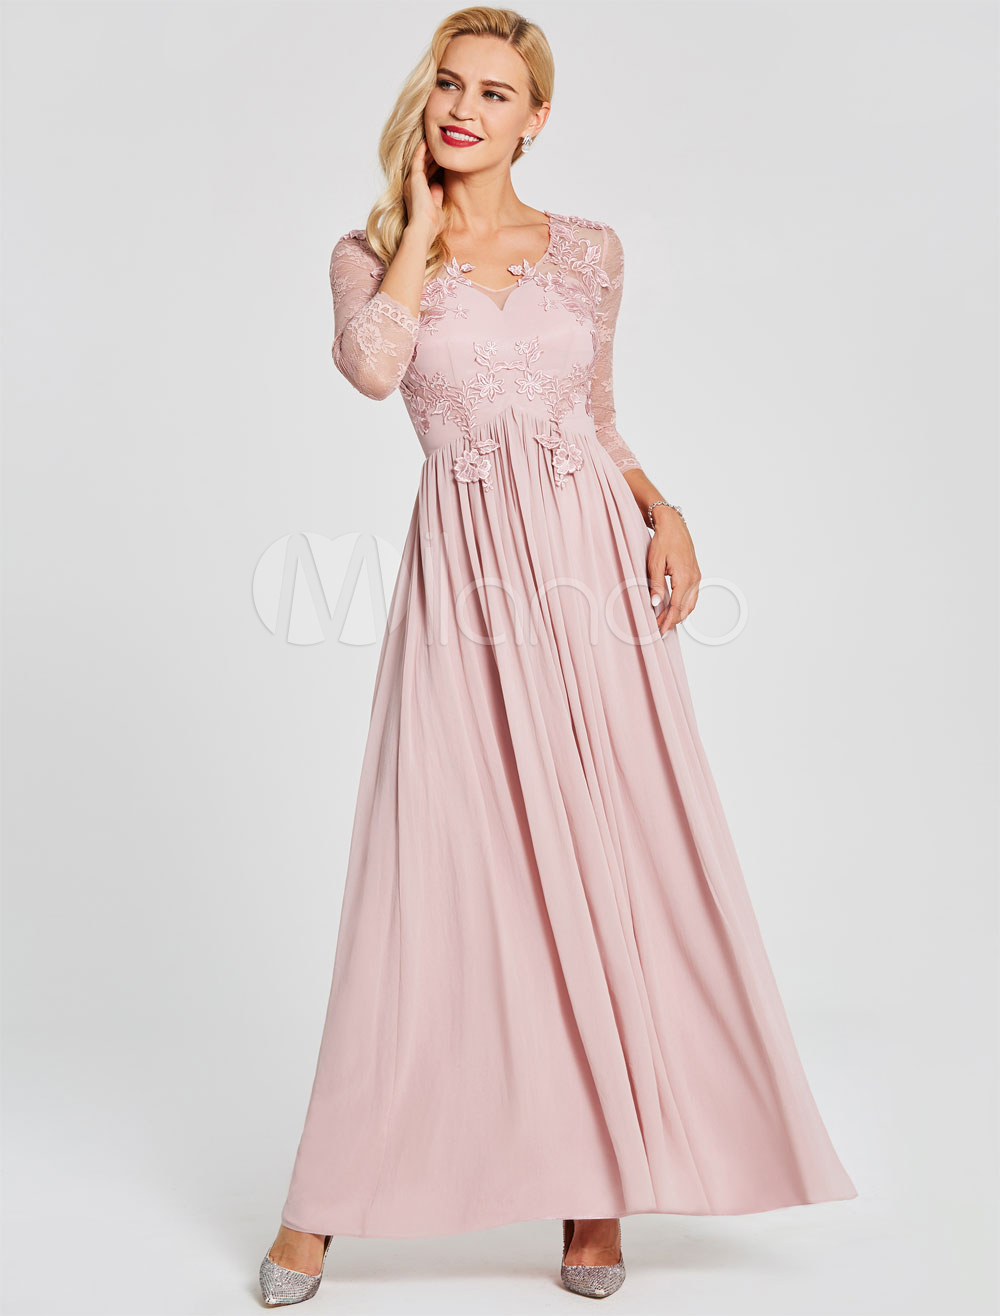 Prom Dresses Long Soft Pink Chiffon Formal Gowns Long Sleeve Applique Illusion Party Dresses (Wedding Cheap Party Dress) photo